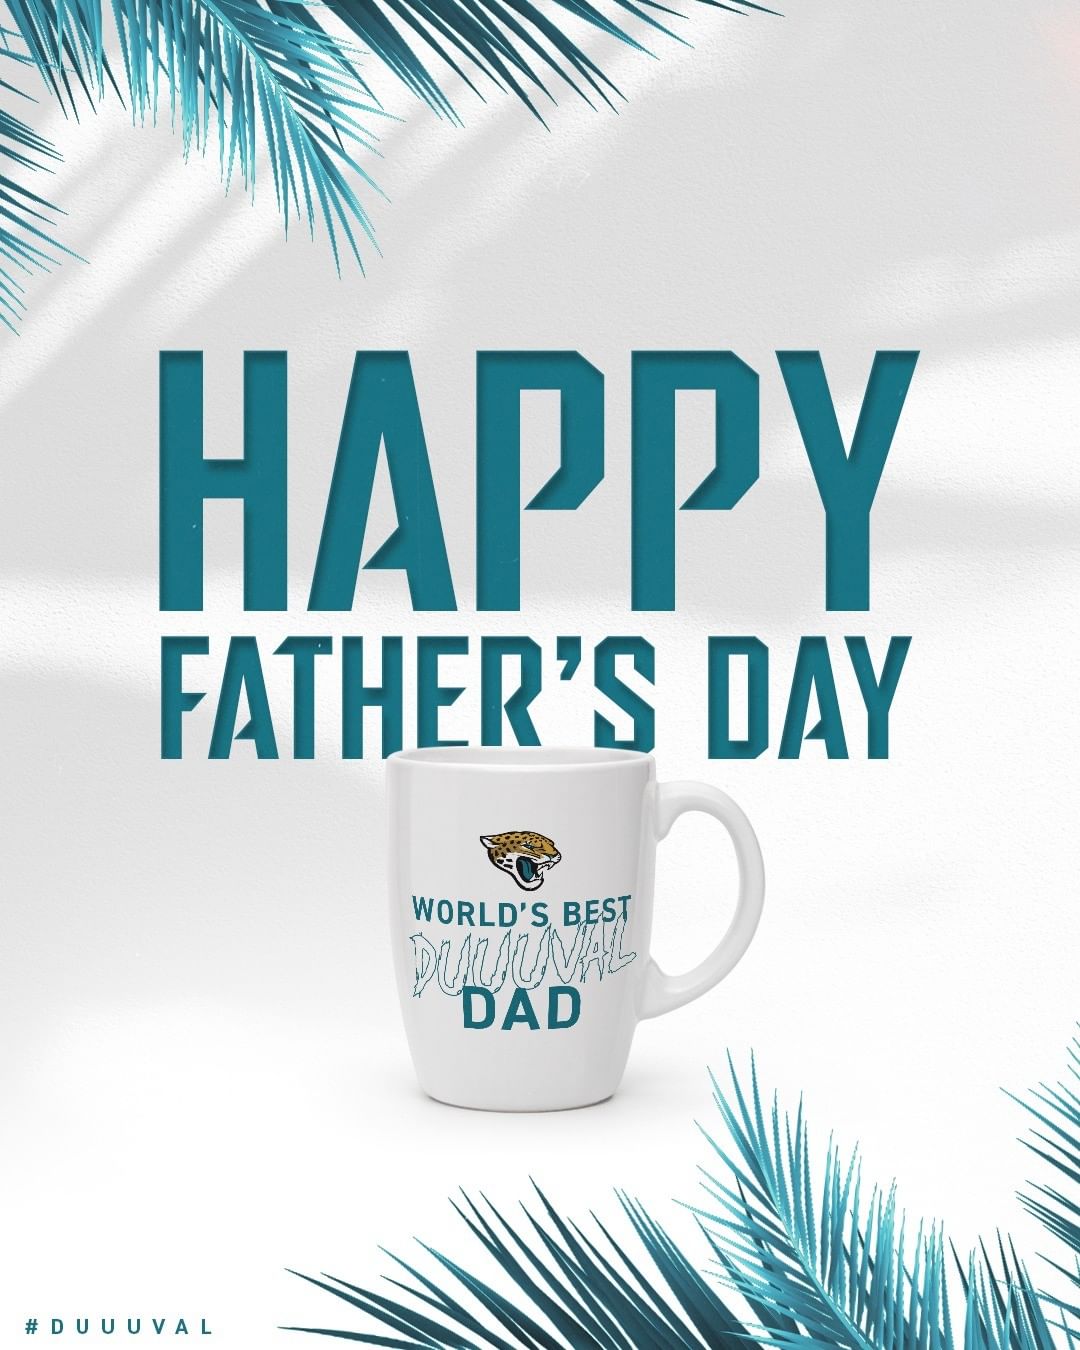 #HappyFathersDay to all the dads out there!...